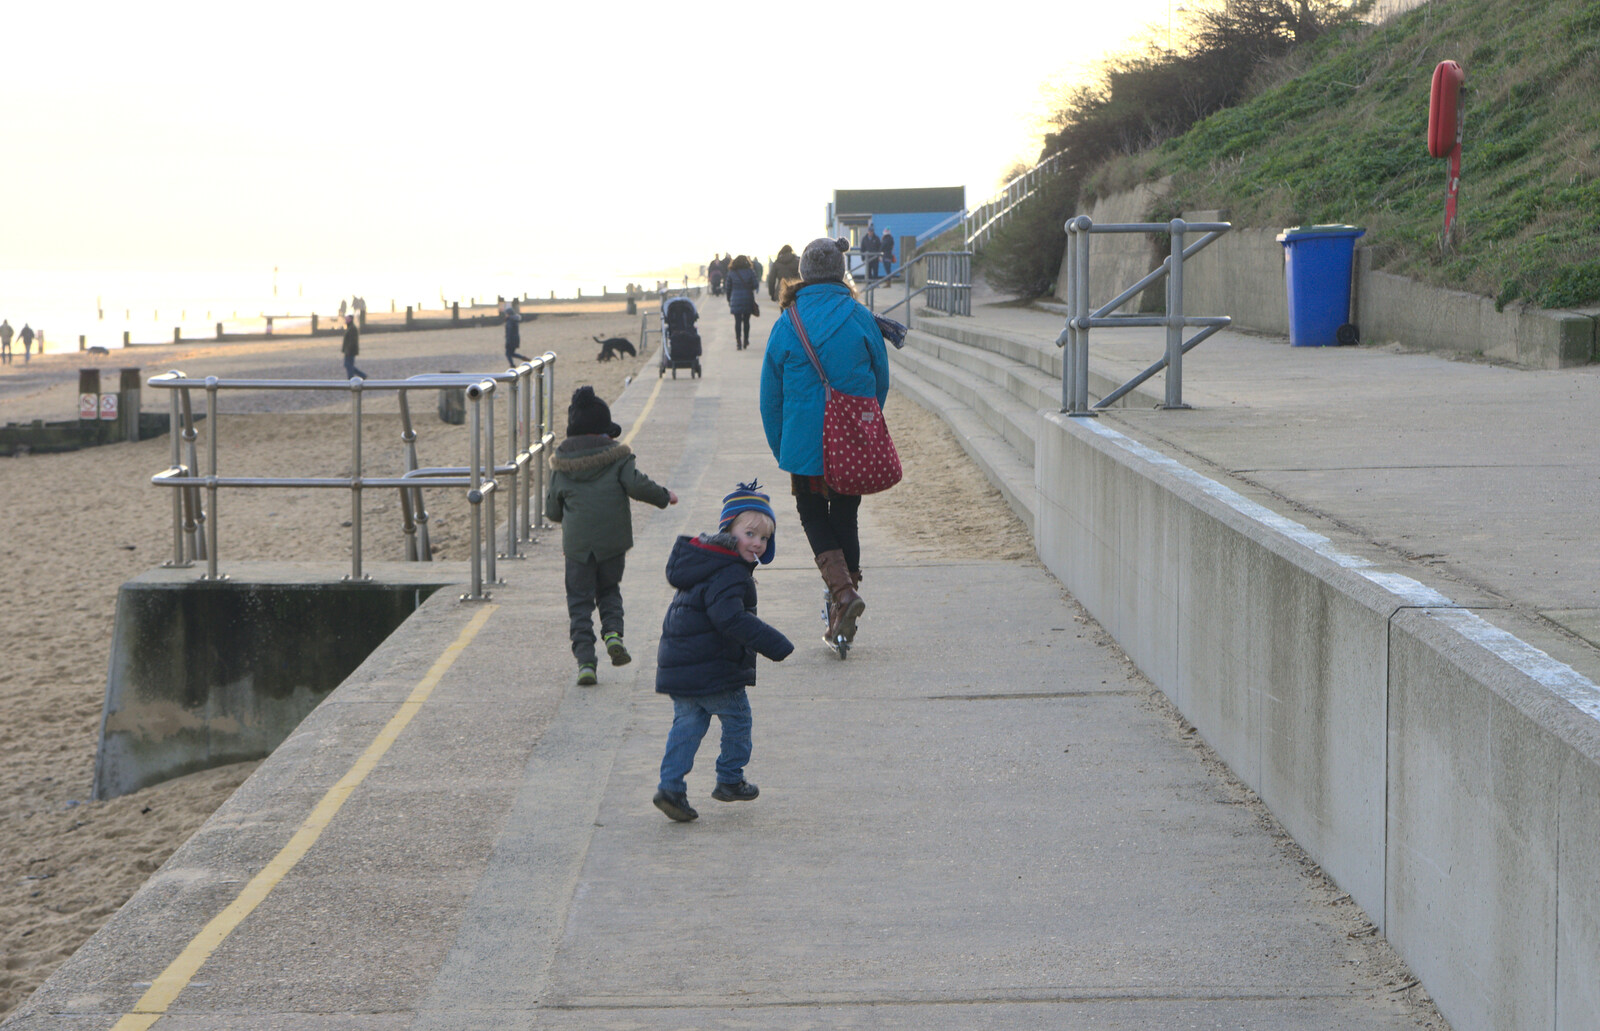 The walk along the prom continues from Sunset on the Beach, Southwold, Suffolk - 30th December 2014